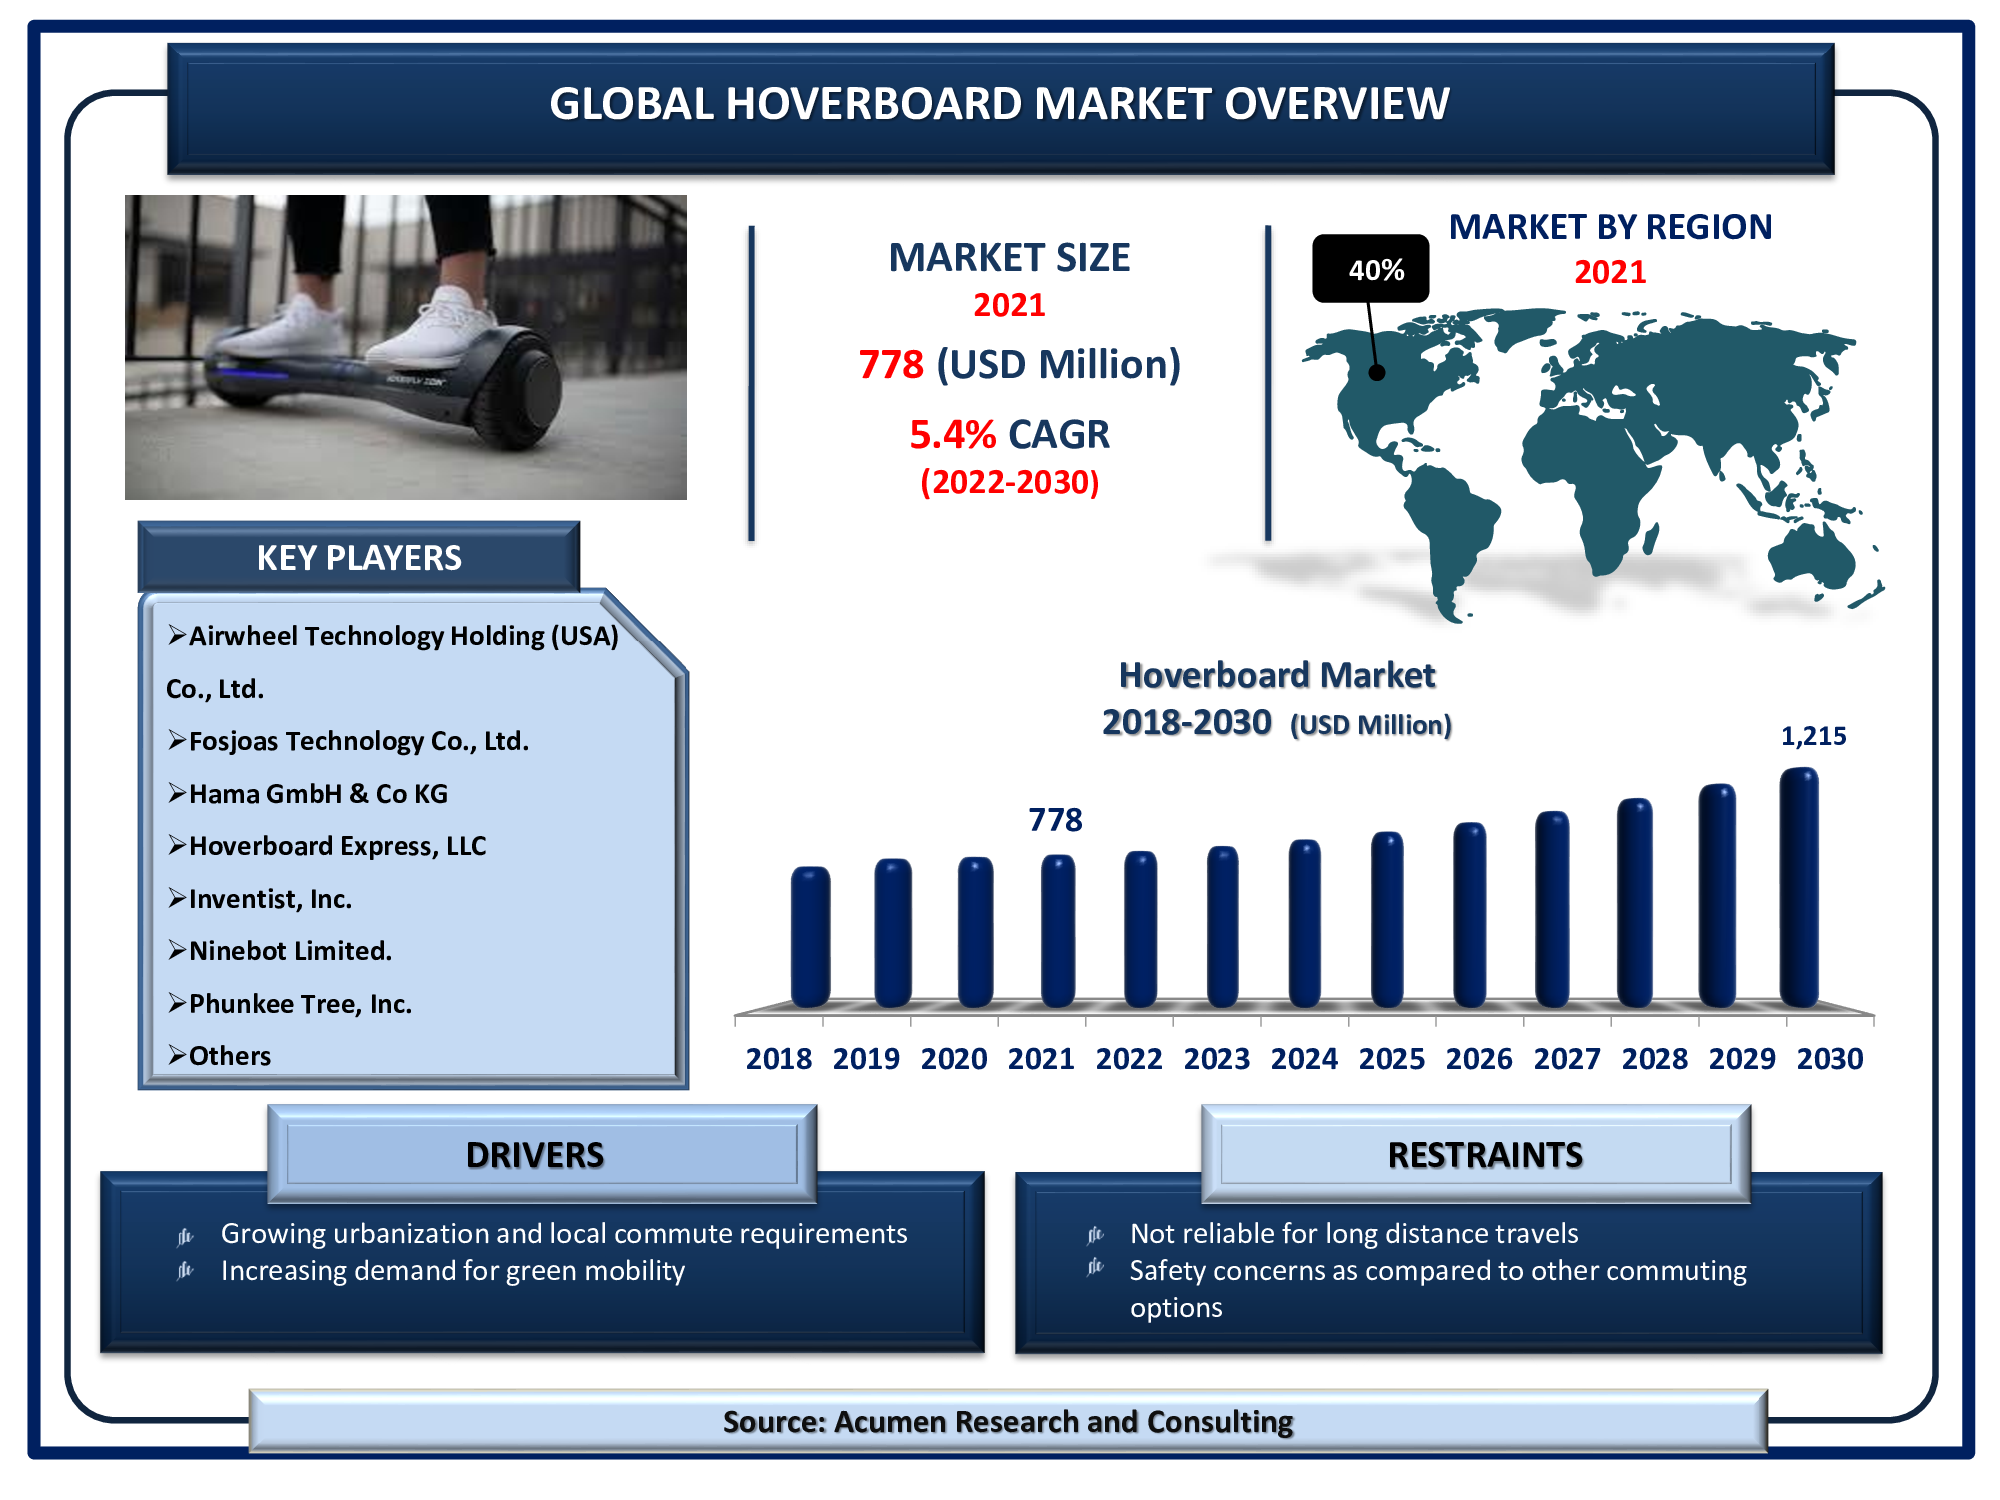 The Global Hoverboard Market Size is valued at USD 778 million in 2021 and is estimated to achieve a market size of USD 1,215 million by 2030; growing at a CAGR of 5.4%.